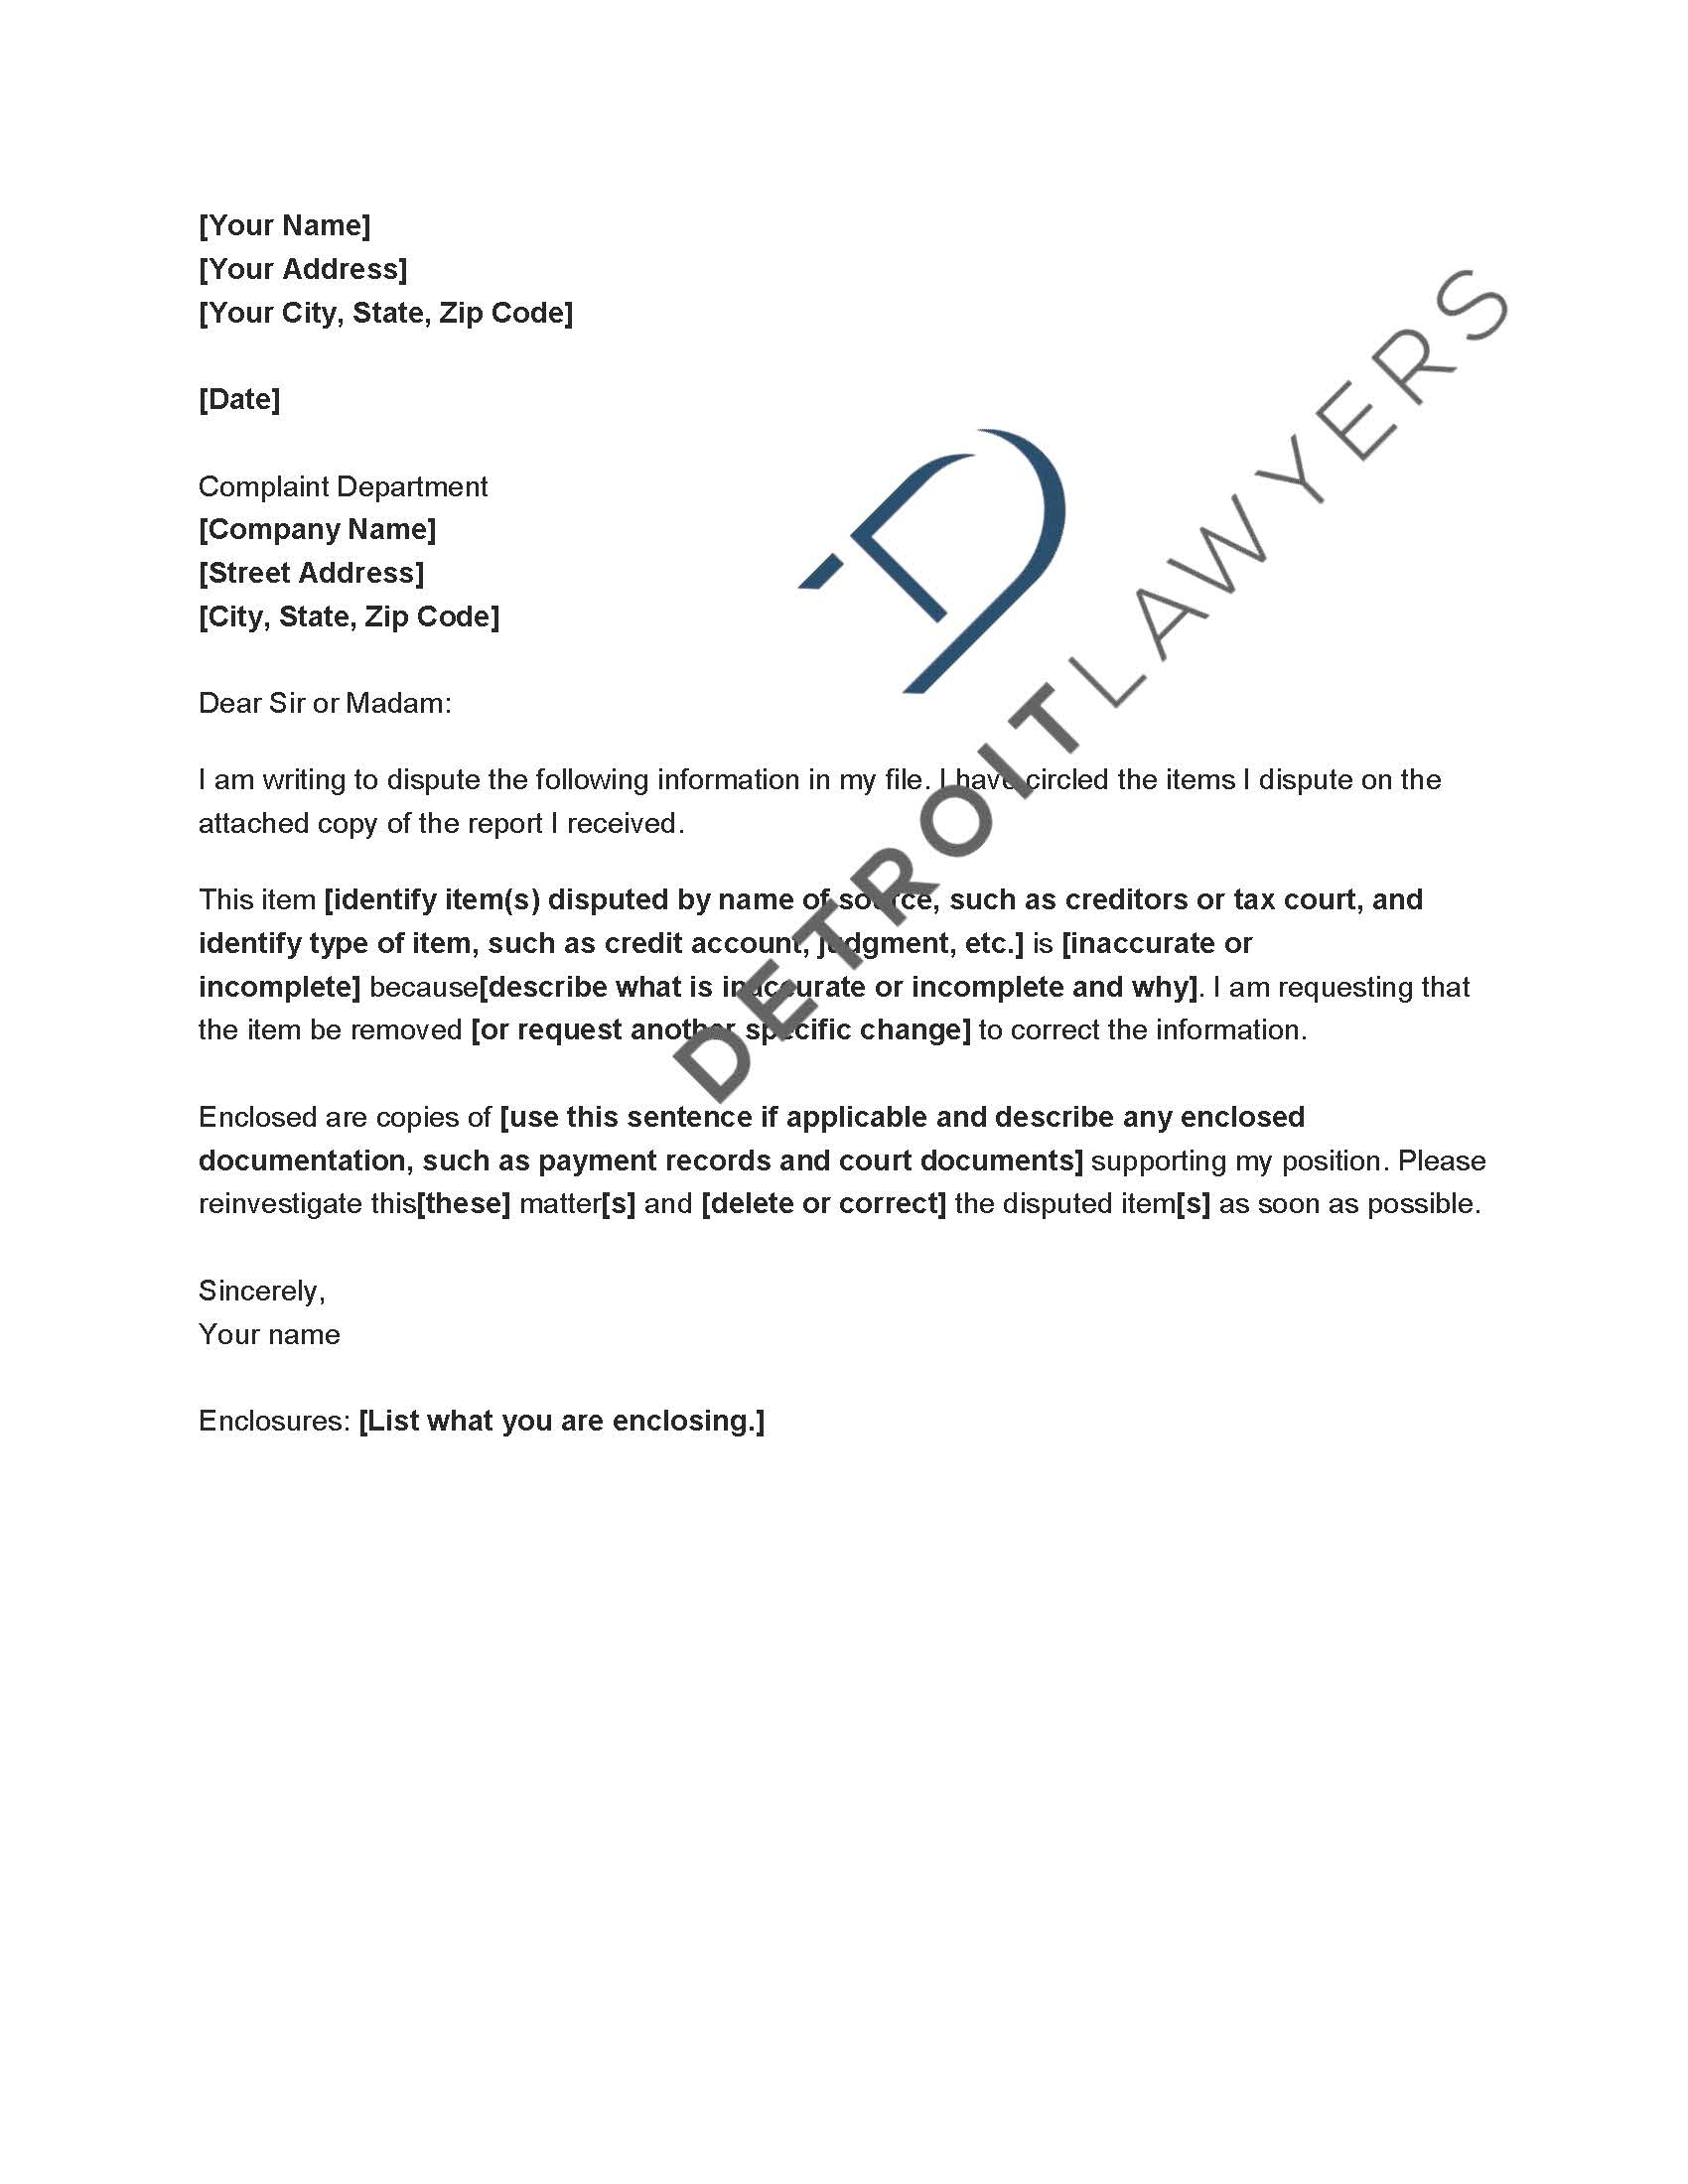 Experian Dispute Letter Template - Free Cover Letter Templates Letter to Creditors